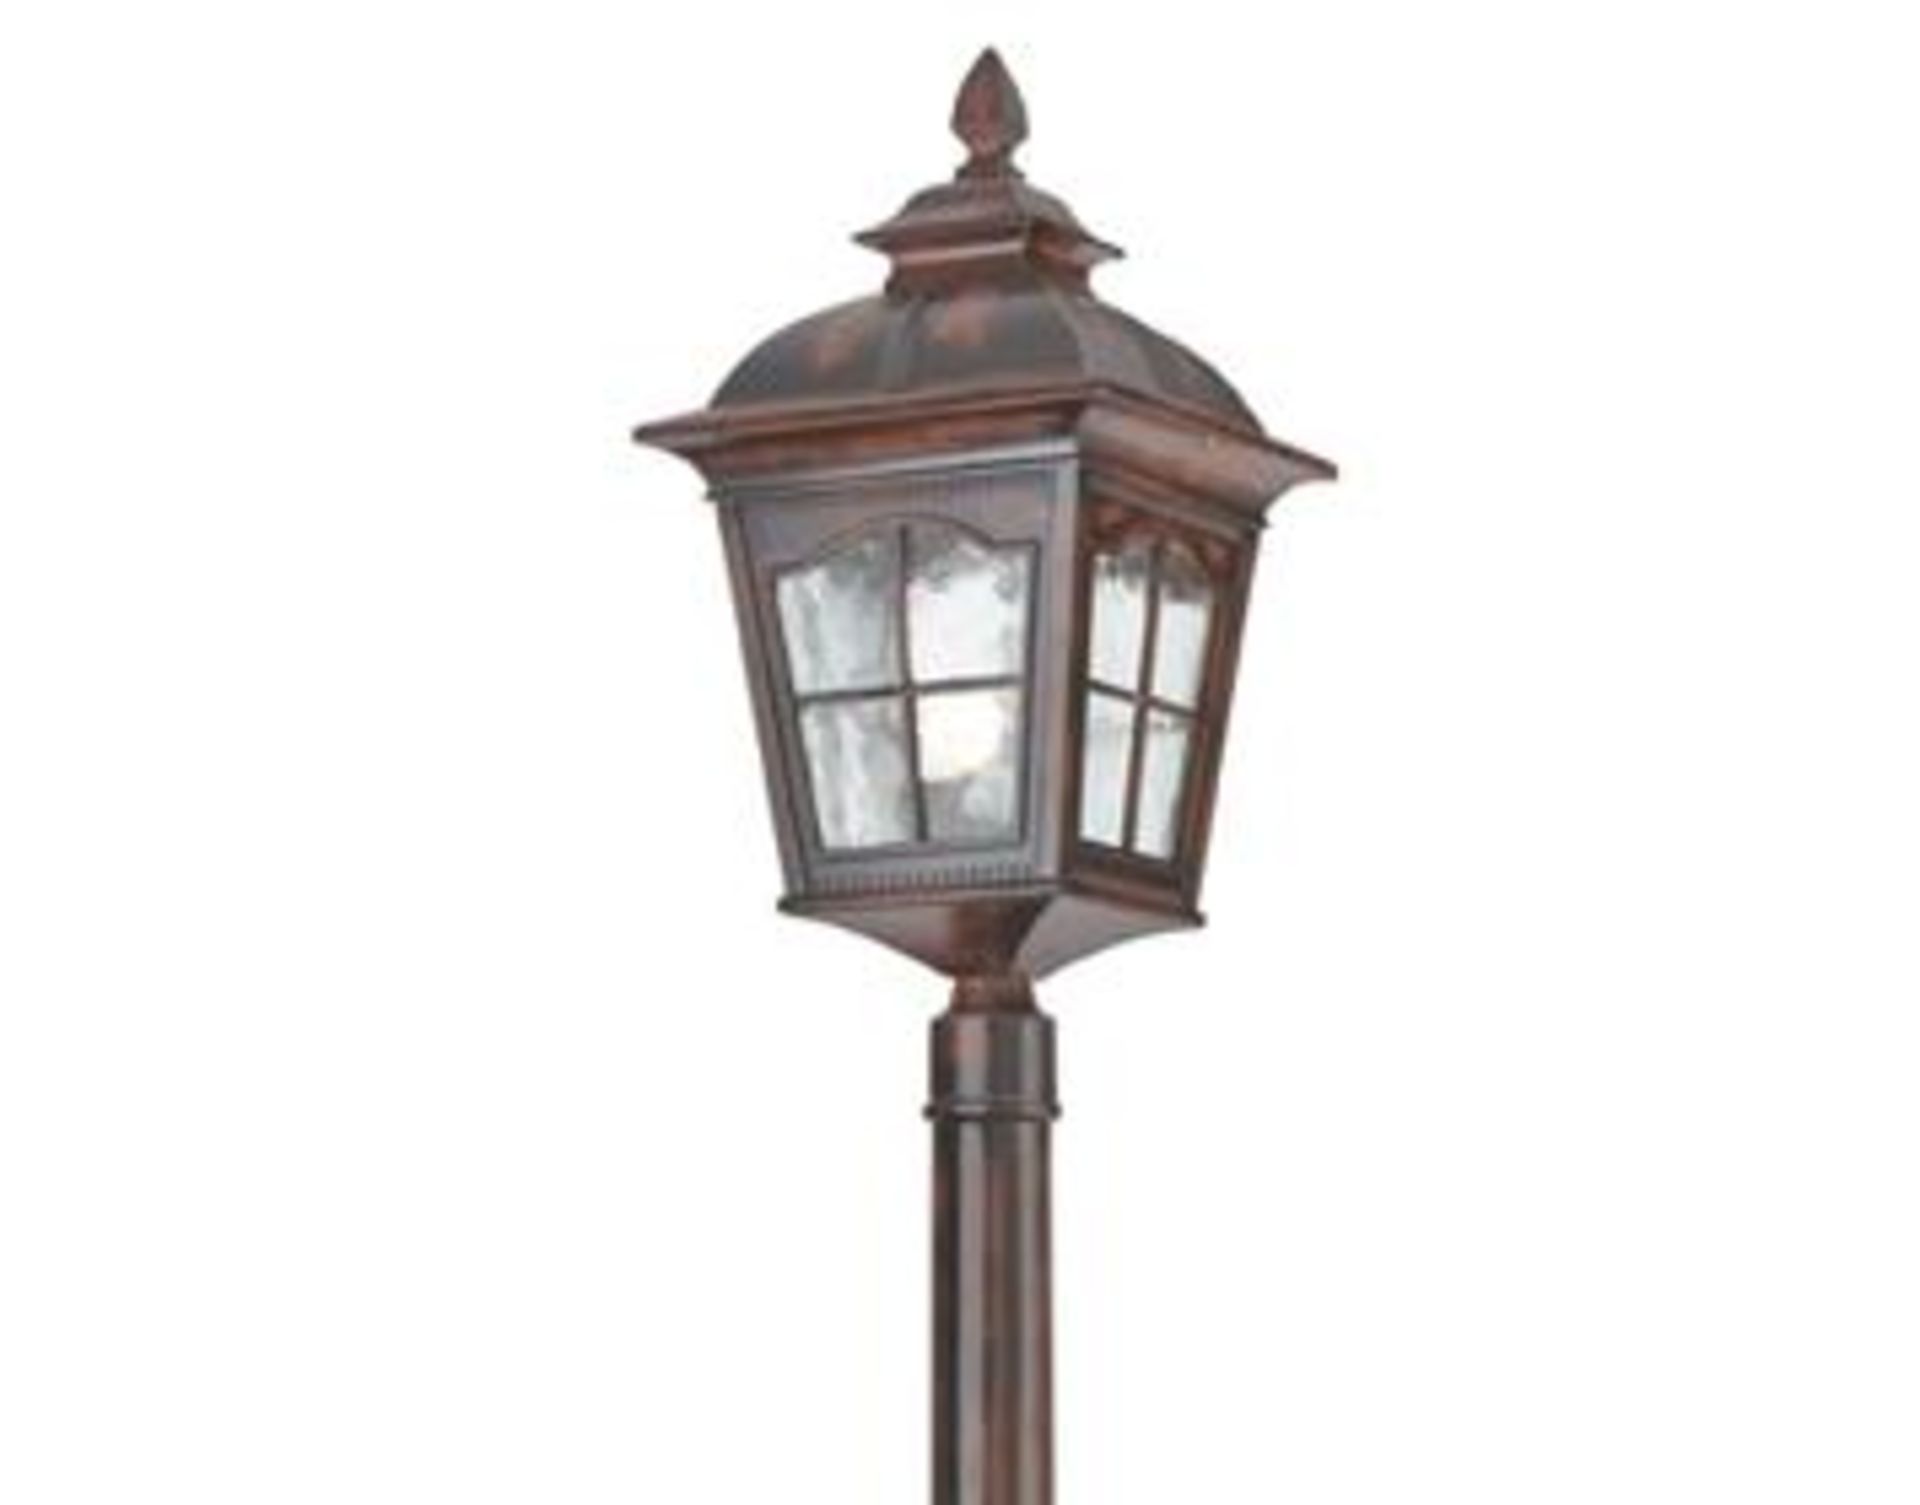 1 x Pompeii Brown Stone Aluminium IP44 Outdoor Post Light - 108cm Height - New Boxed Stock - CL323 - - Image 4 of 4